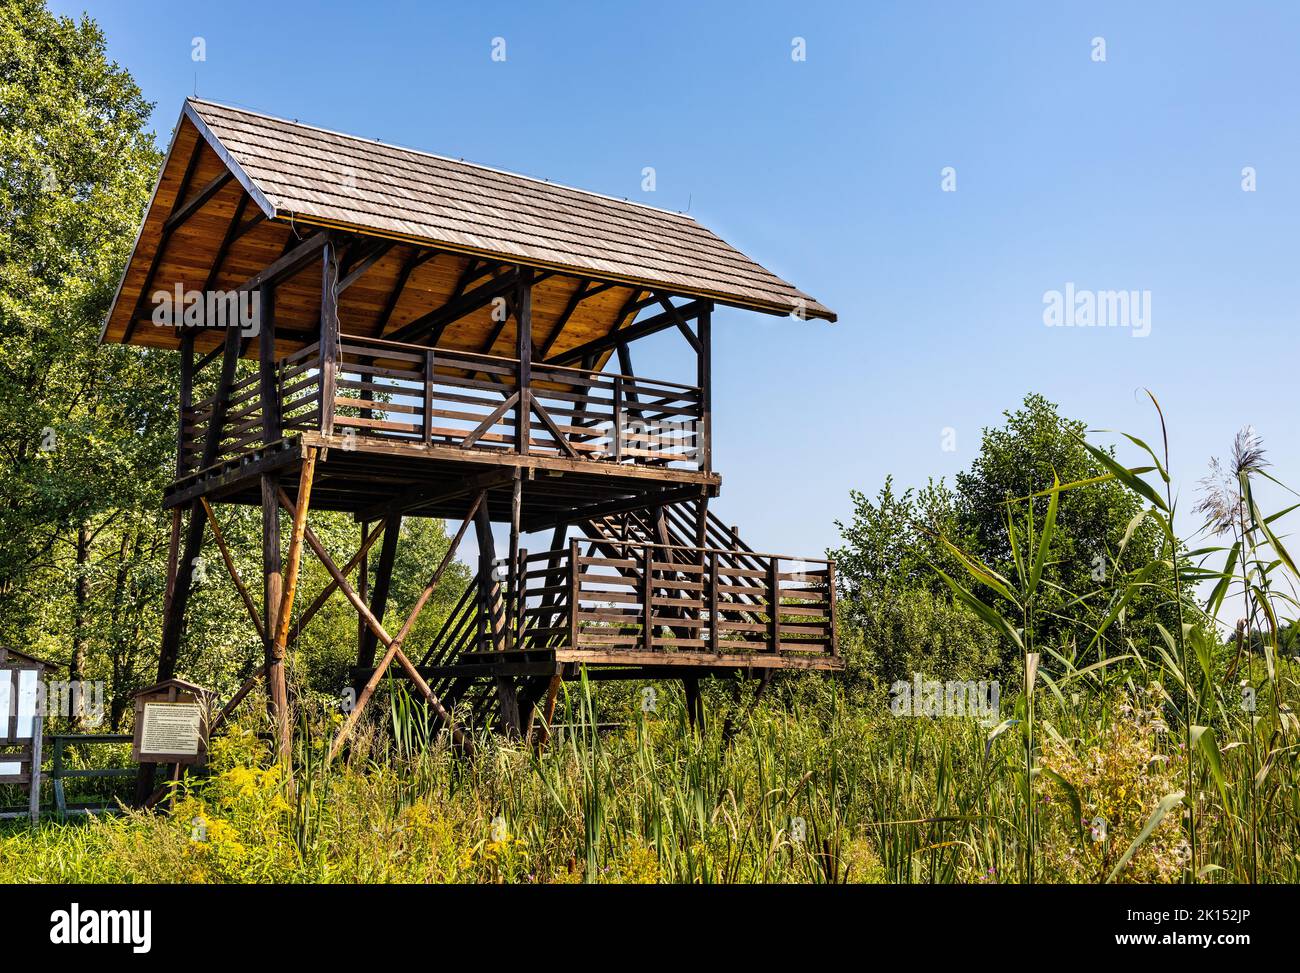 Calowanie, Poland - August 27, 2022: Observatory tower and platform overlooking Bagno Calowanie Swamp wildlife reserve in Podblel village south of War Stock Photo